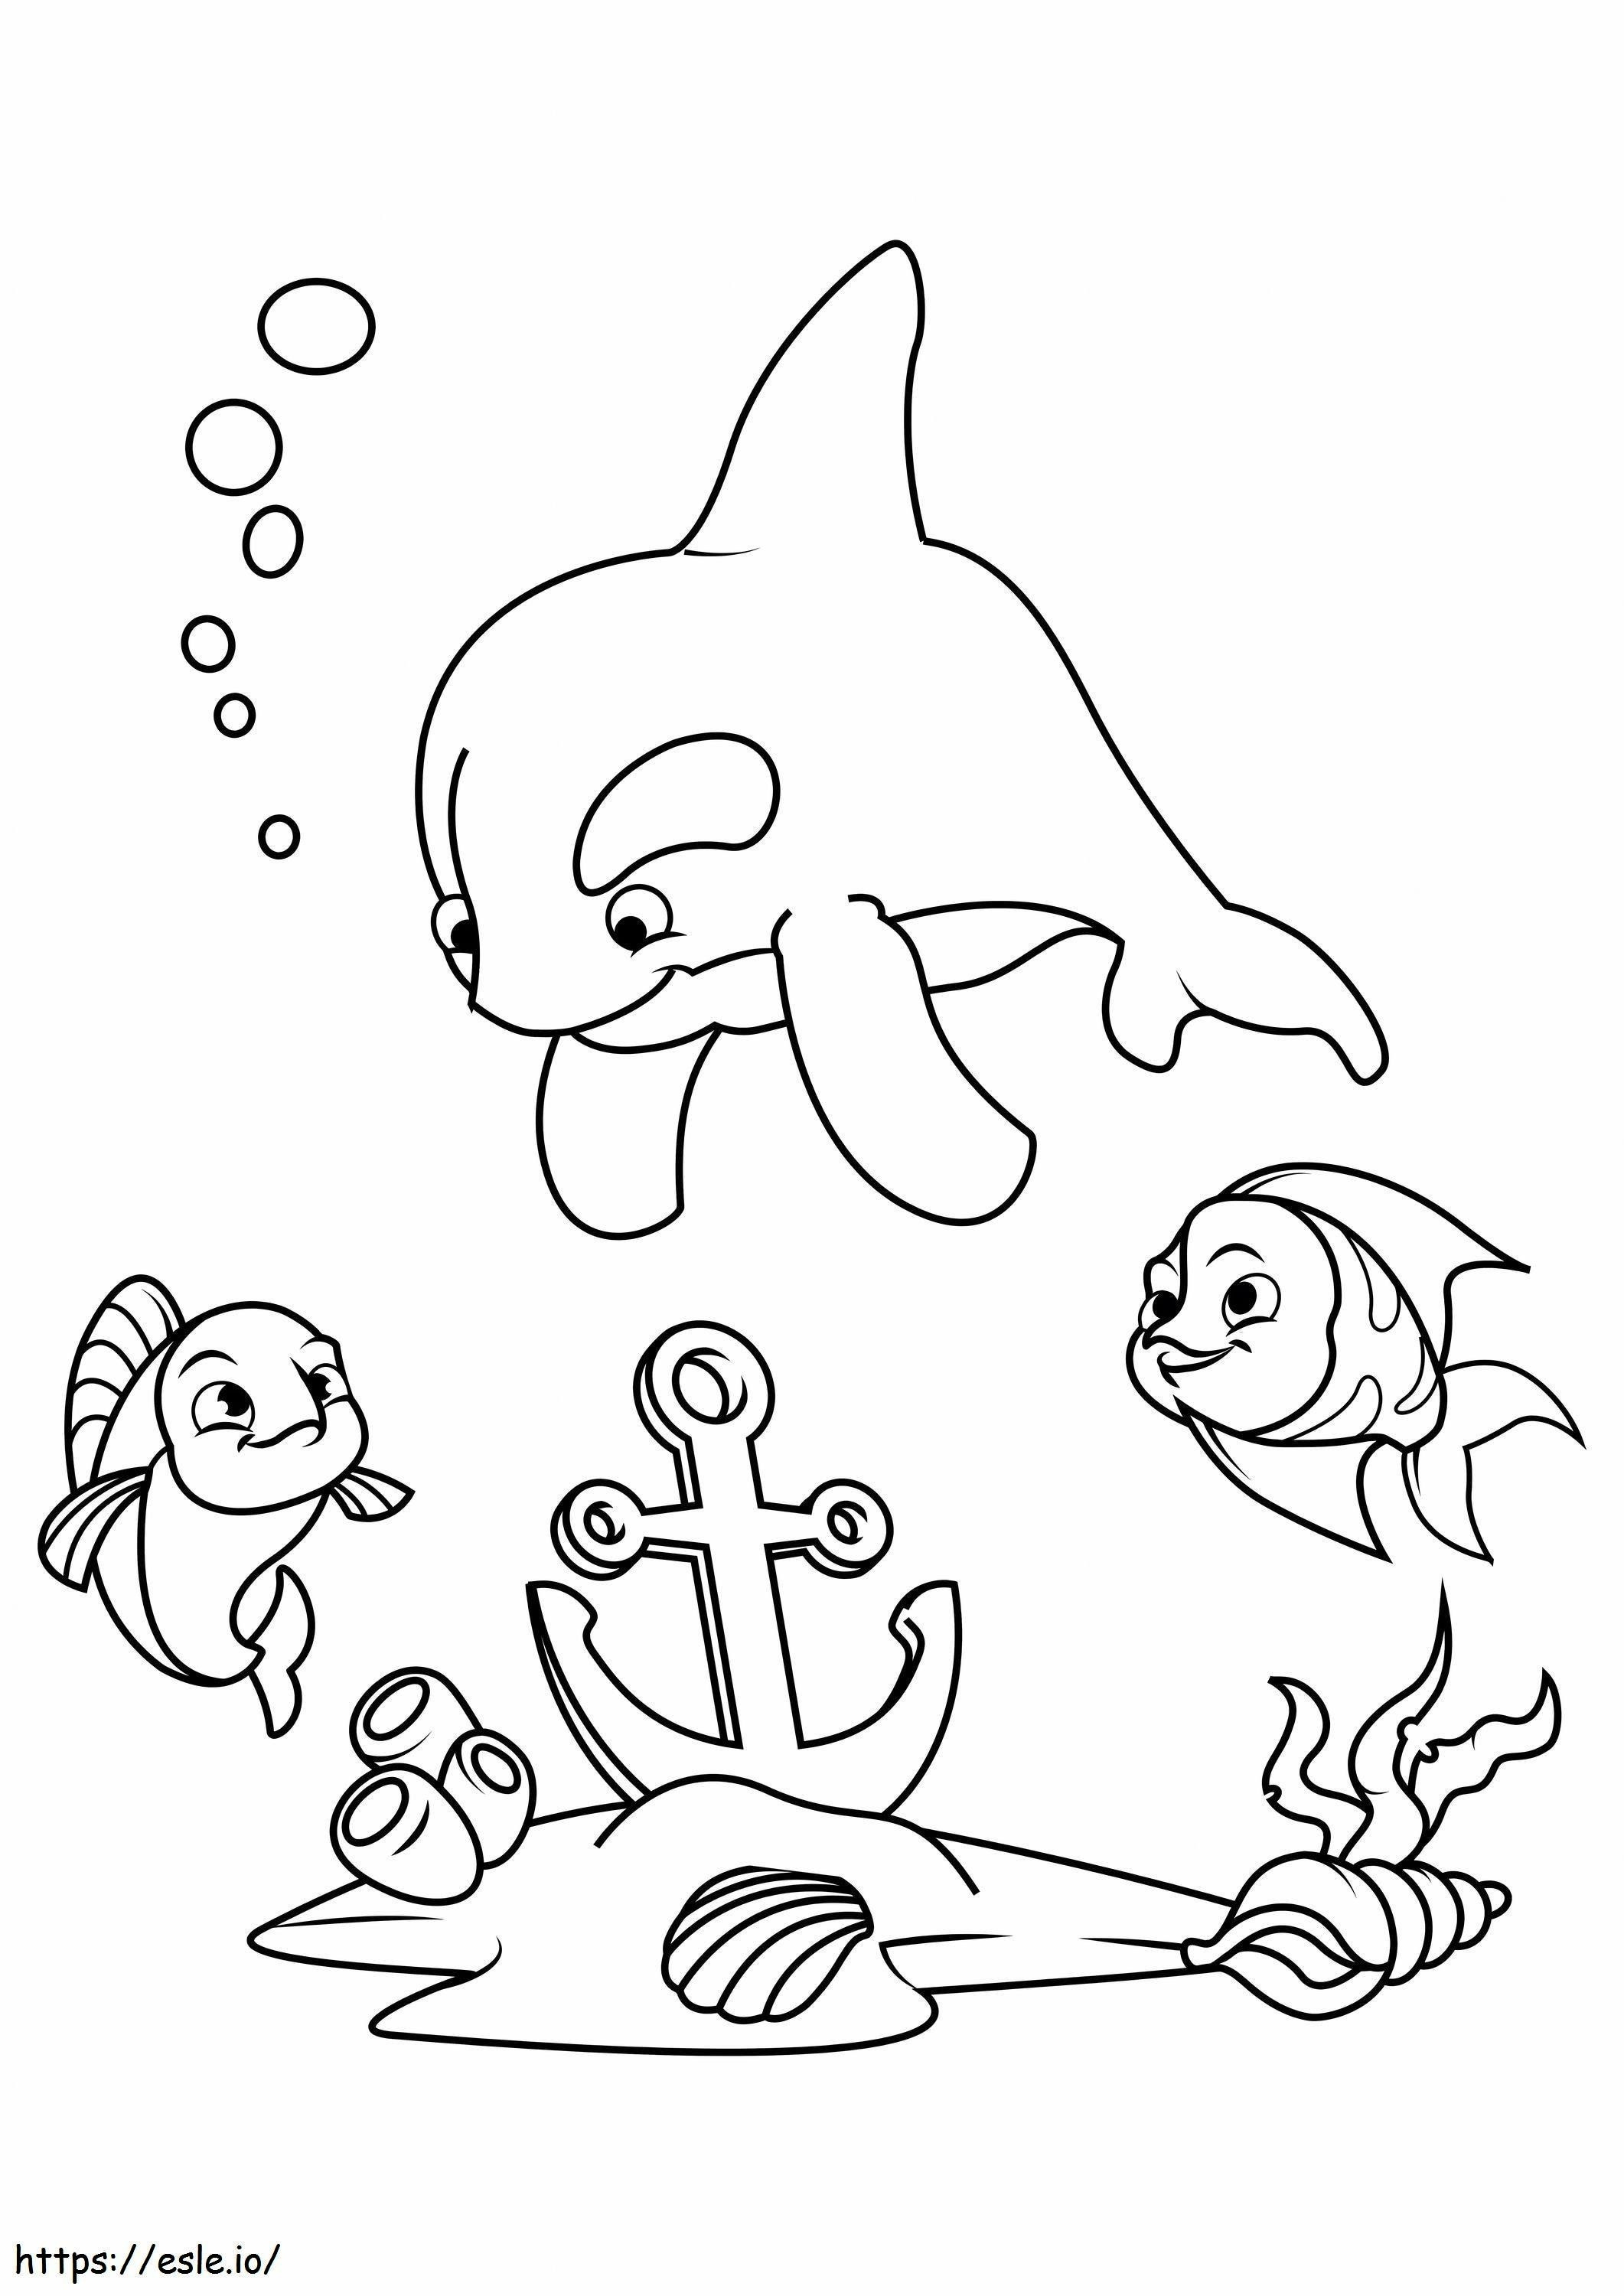 Dolphin And Two Fish With Scaled Anchor coloring page